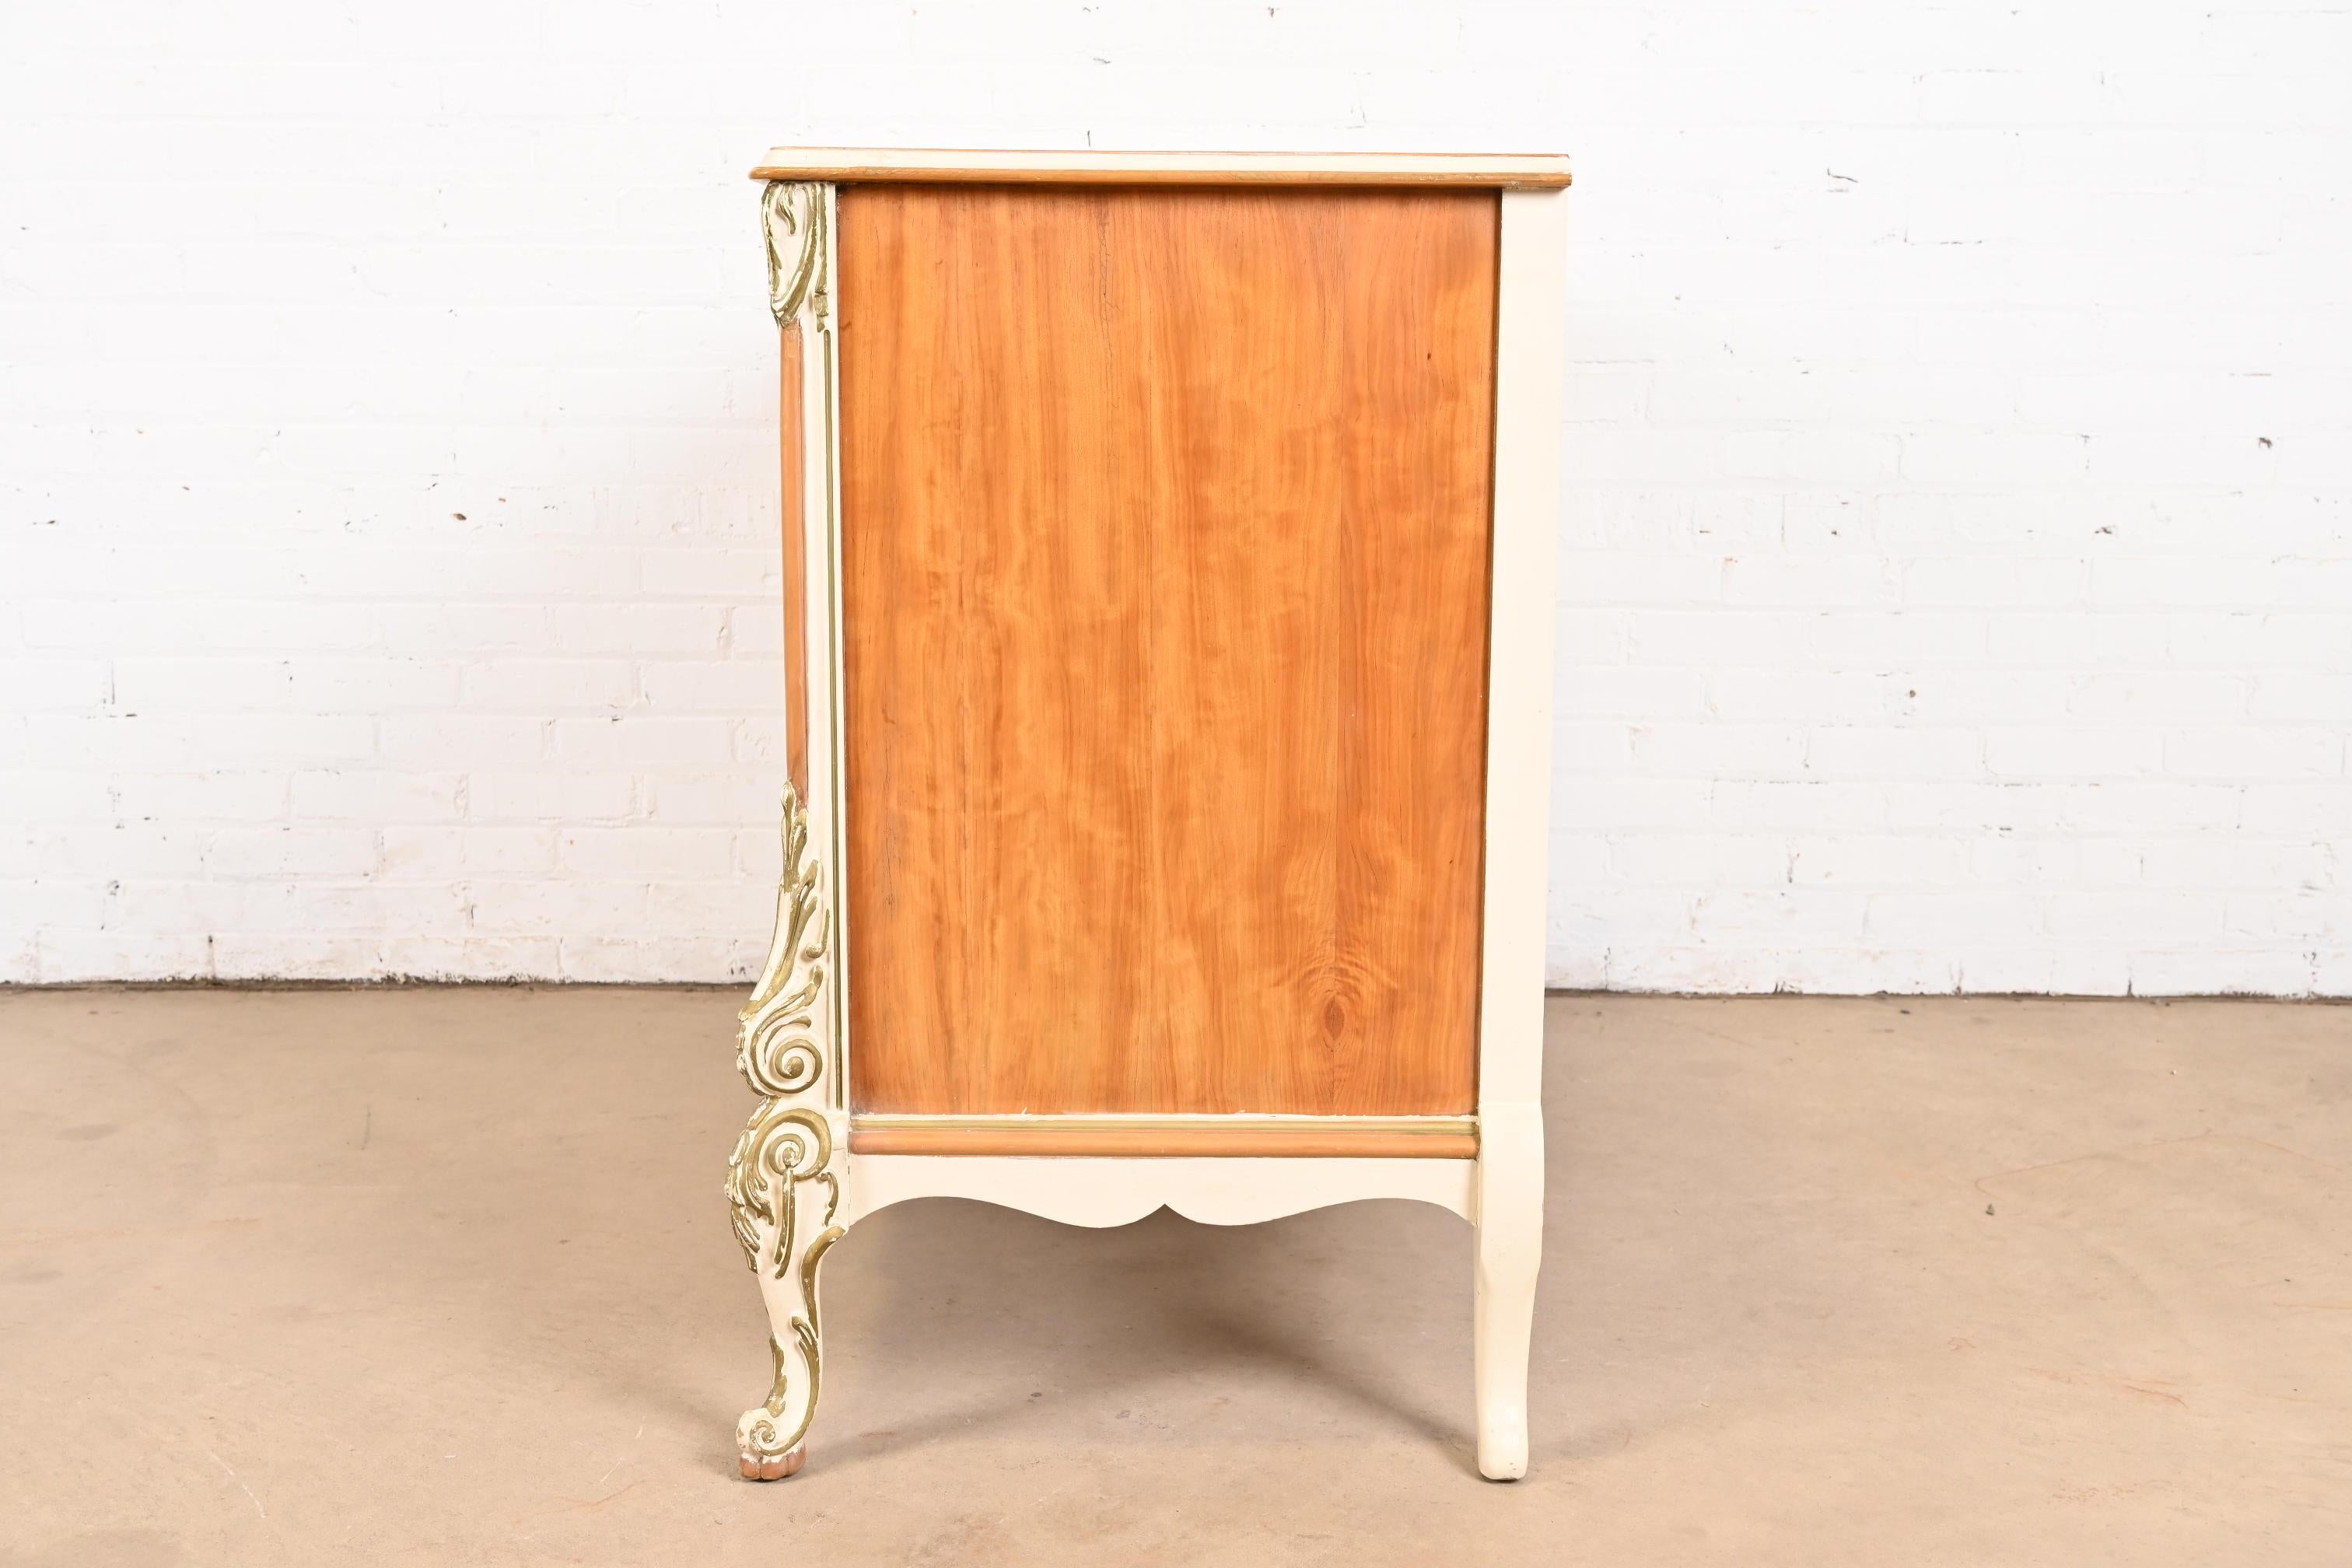 Romweber French Rococo Satinwood Inlaid Marquetry Parcel Painted Dresser, 1930s For Sale 8